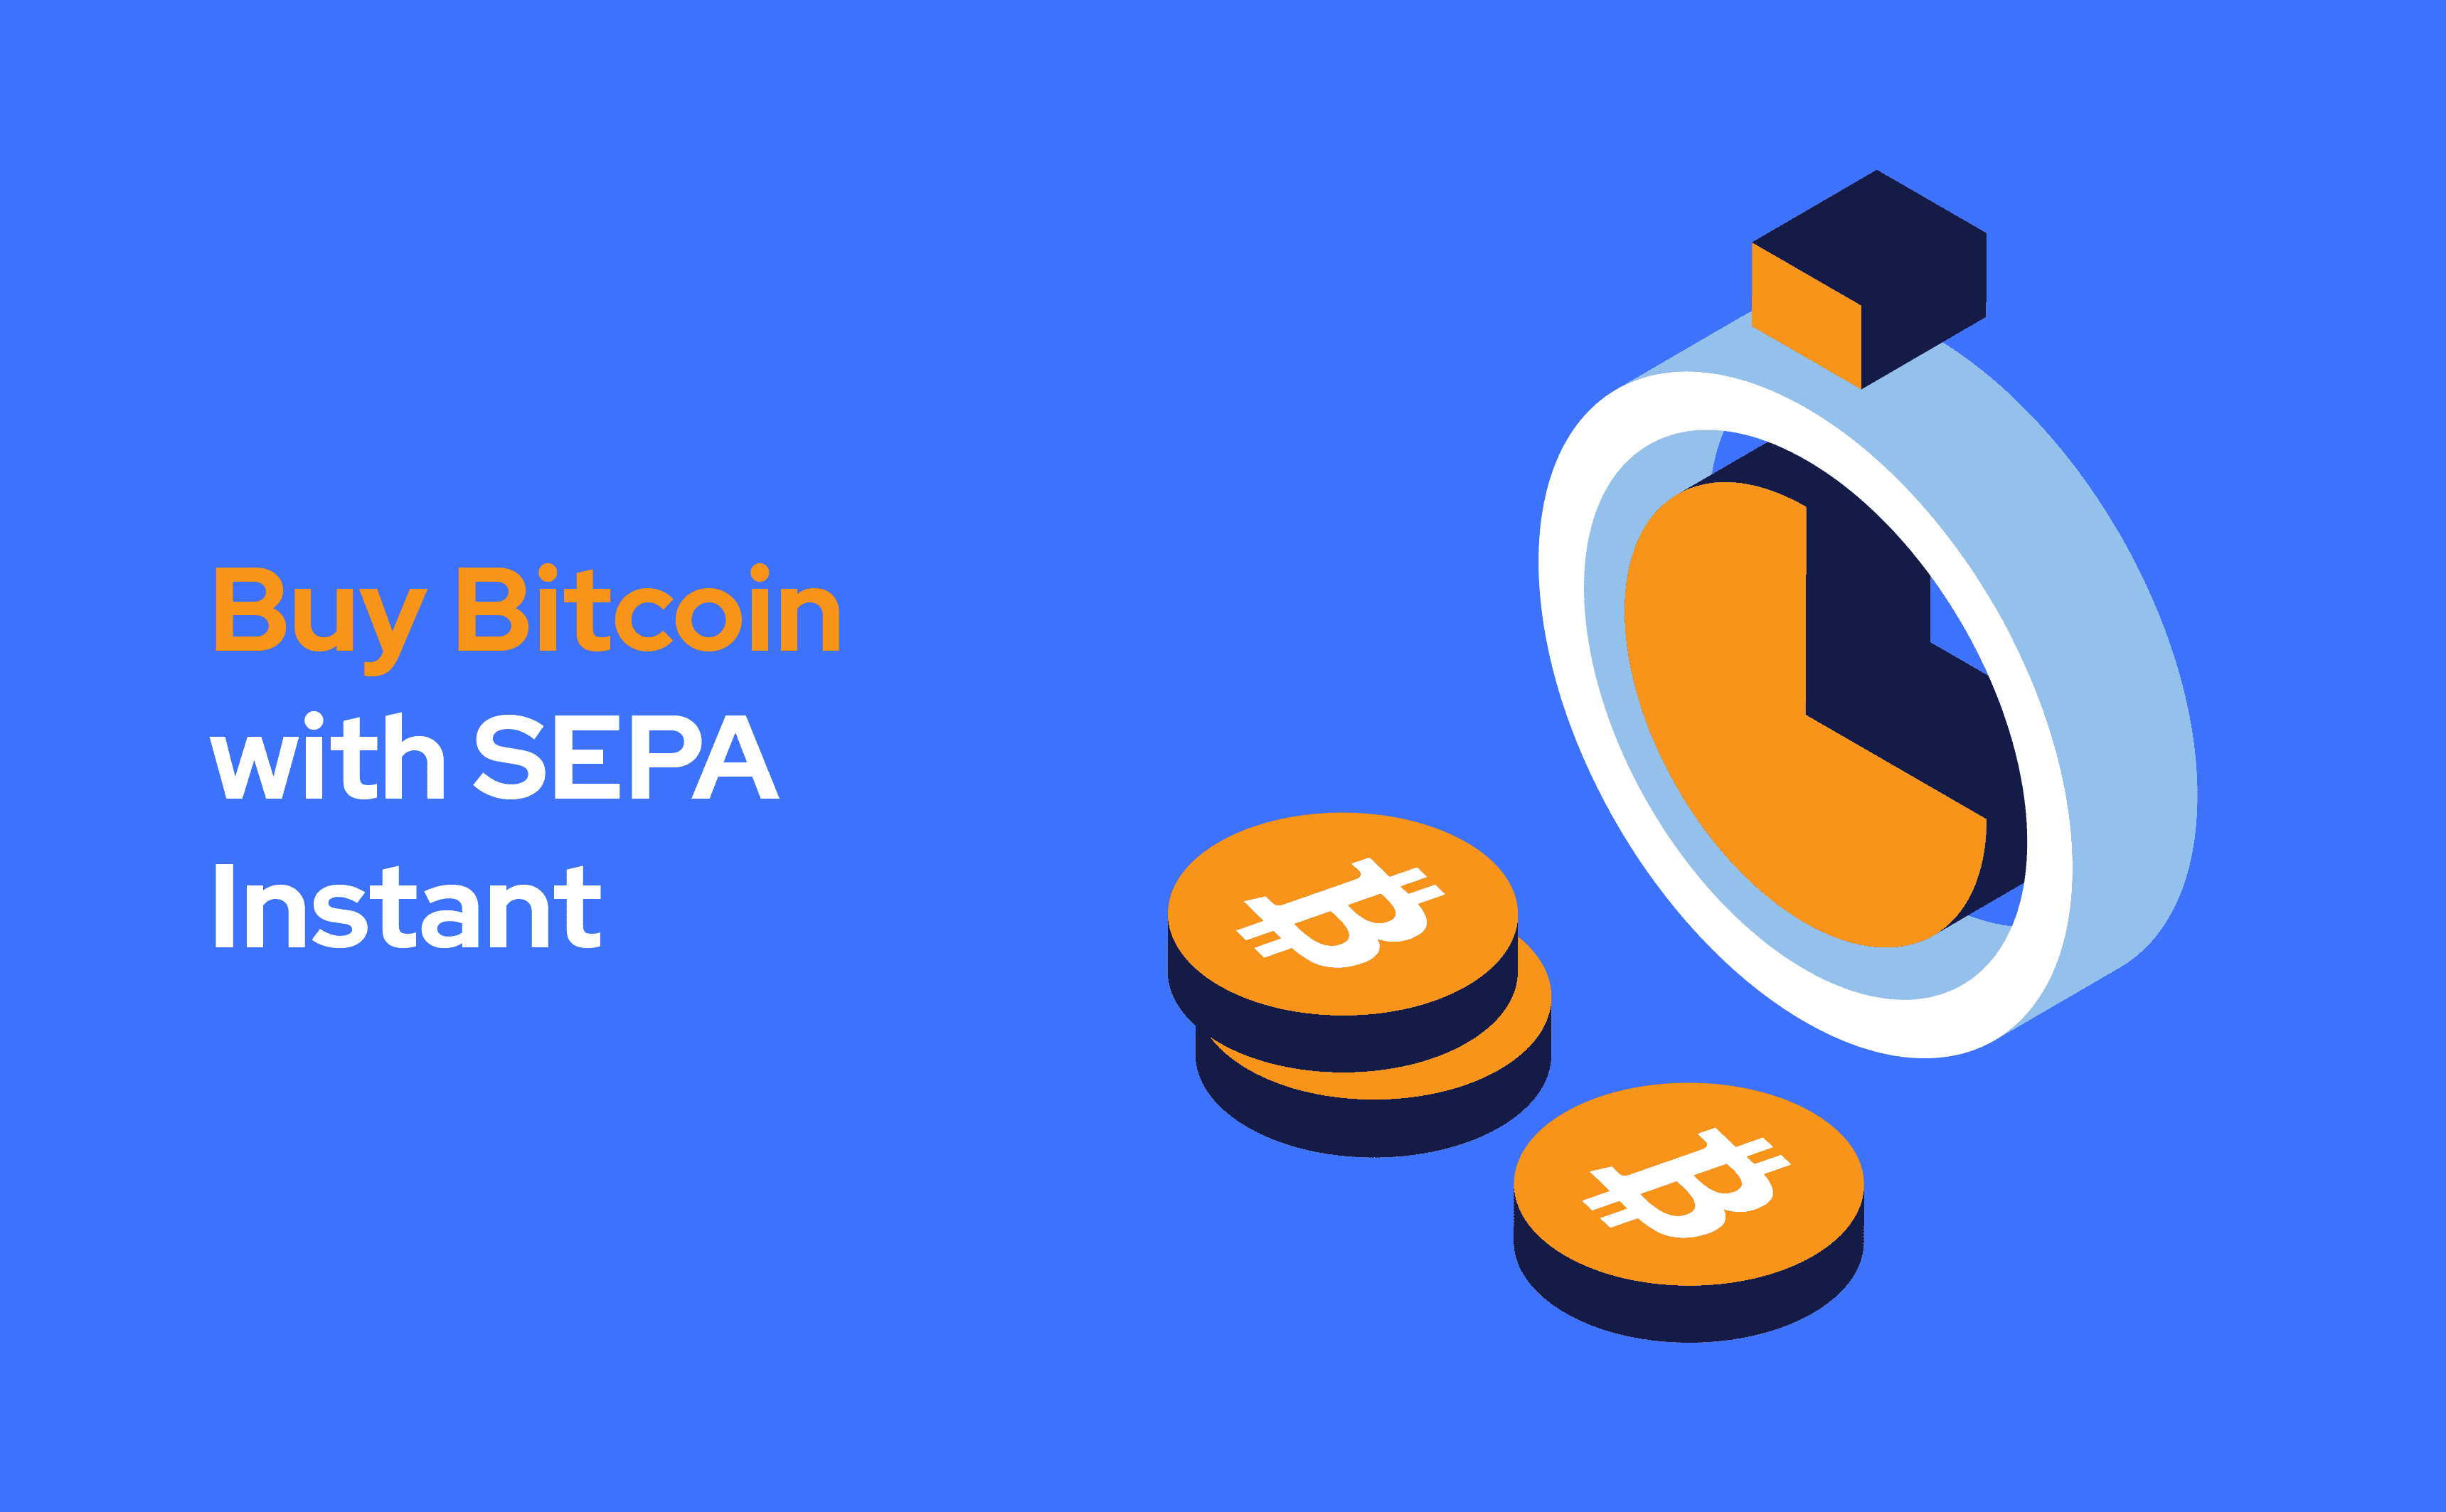 In this blog post, we present a quick guide on how to buy Bitcoin with SEPA Instant.